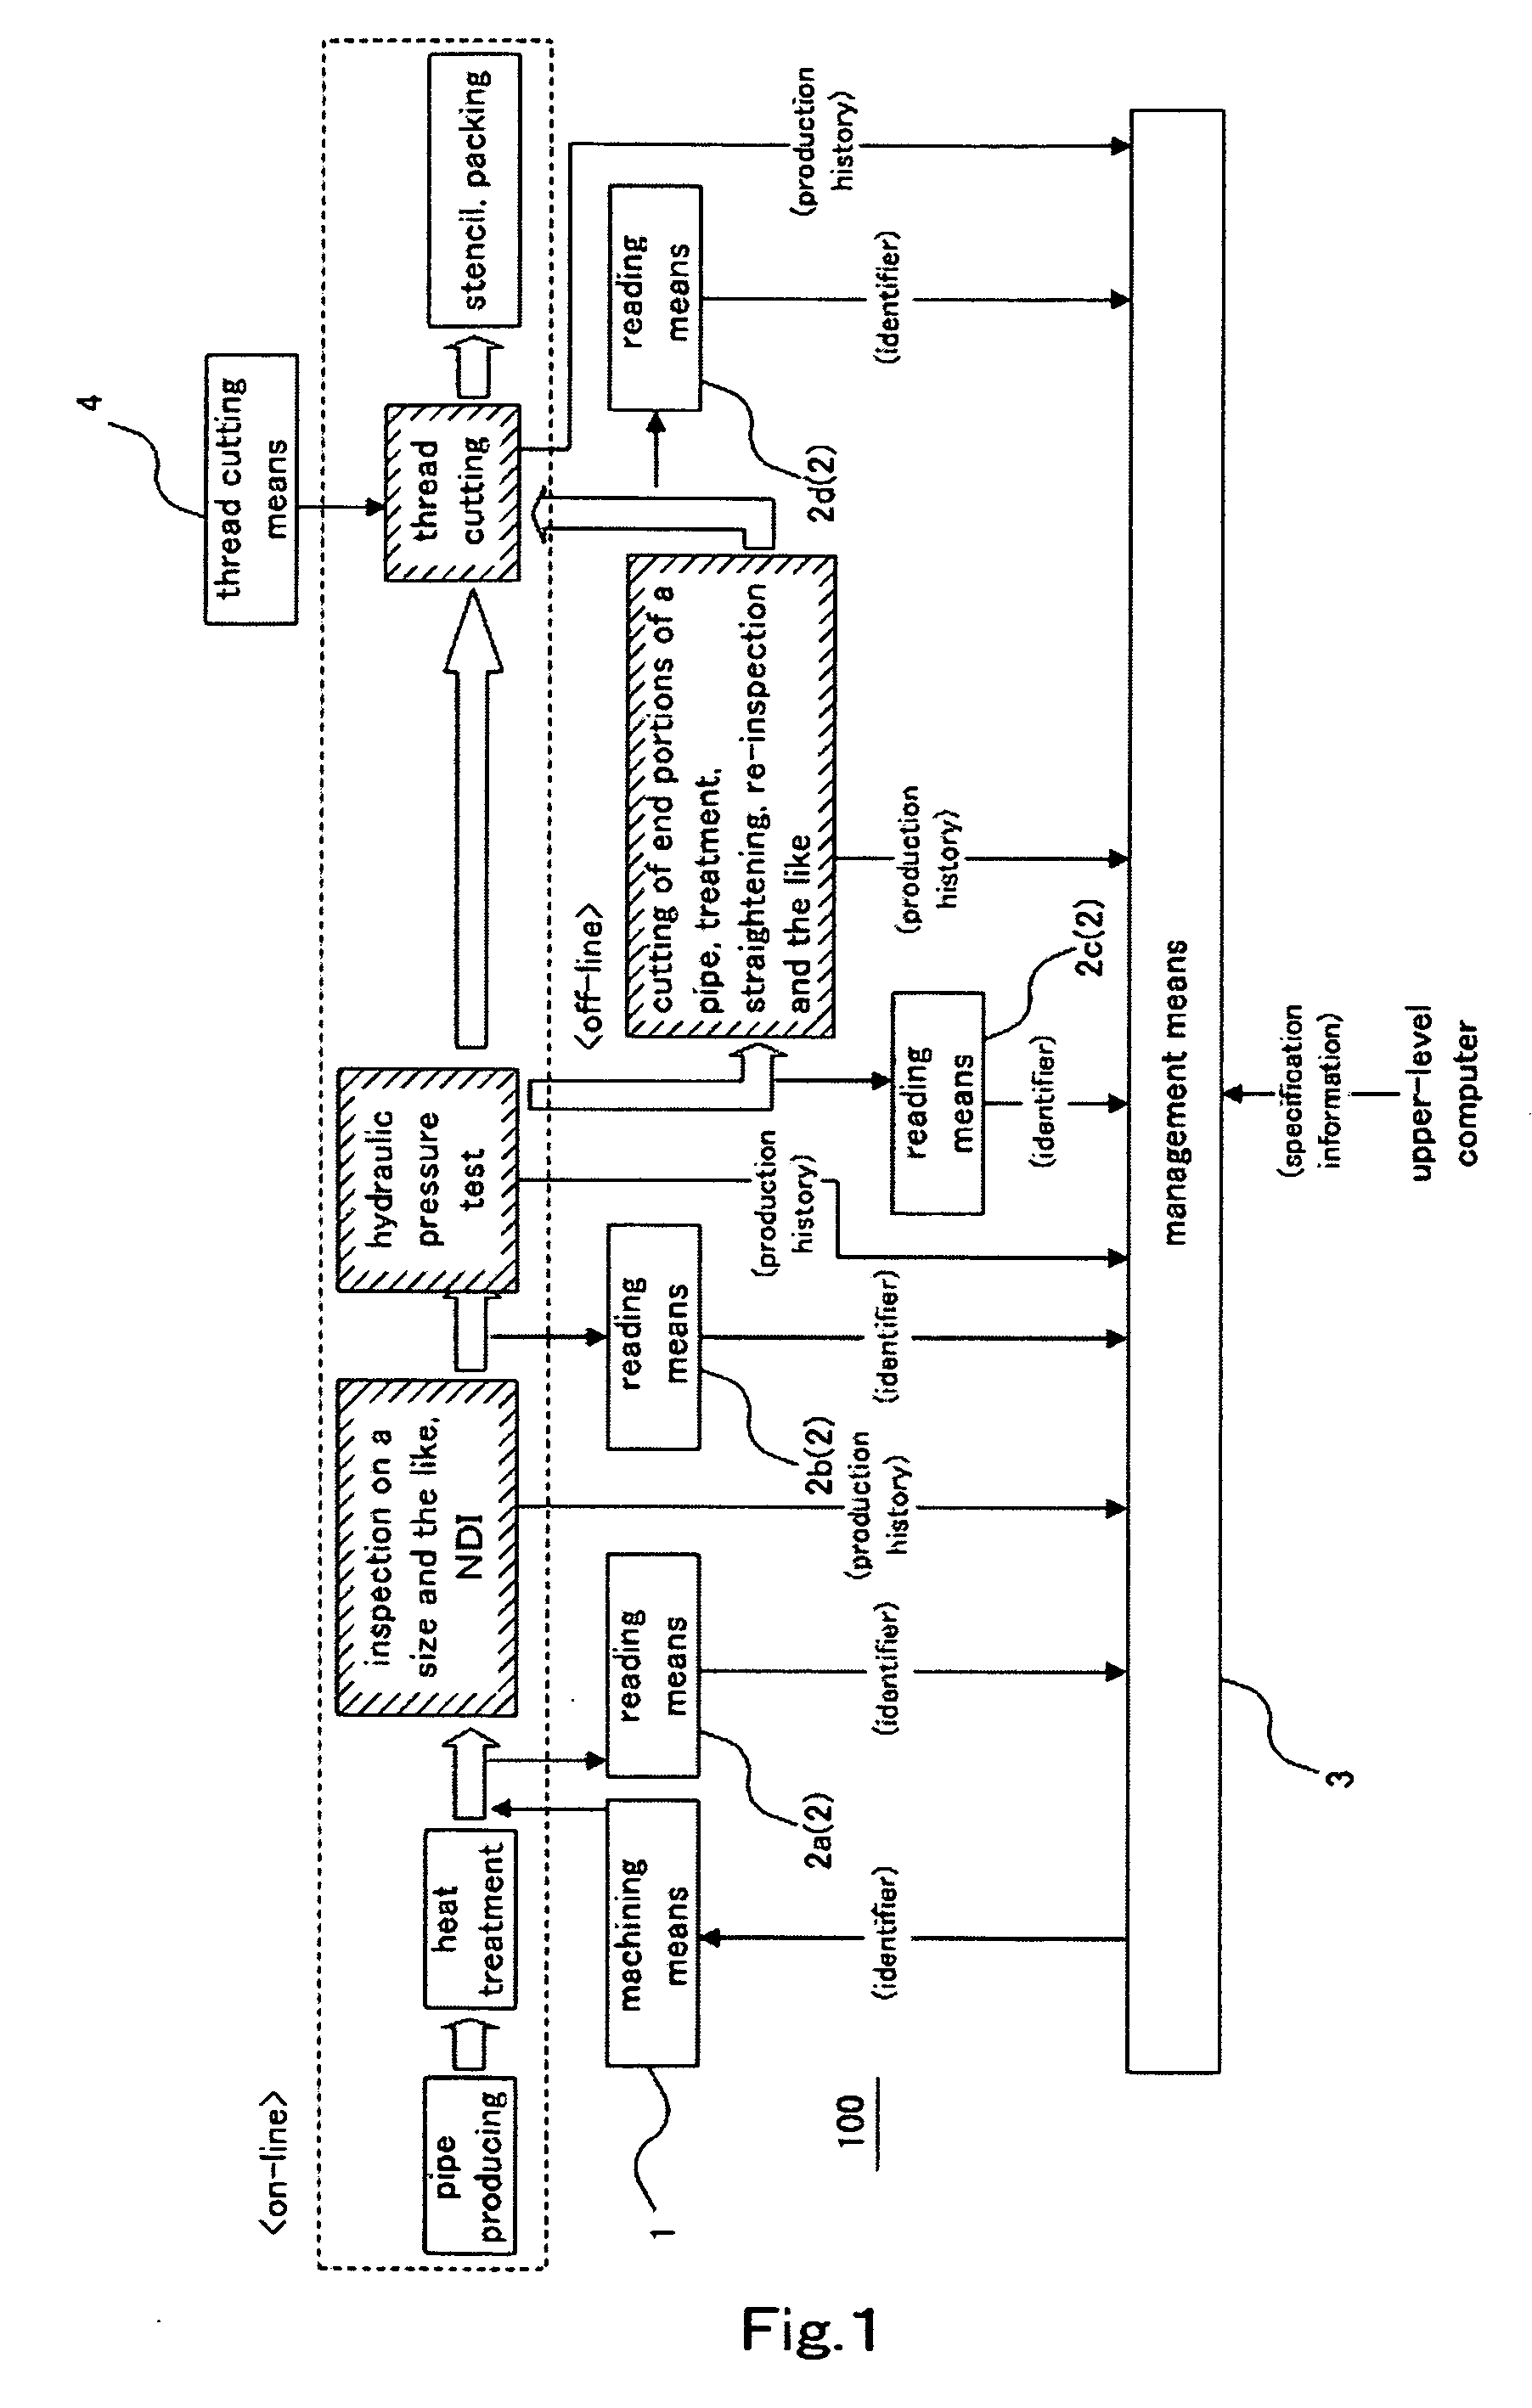 Method and Apparatus for Managing Production History Information of Pipe or Tube and Method for Producing Pipe or Tube Therewith